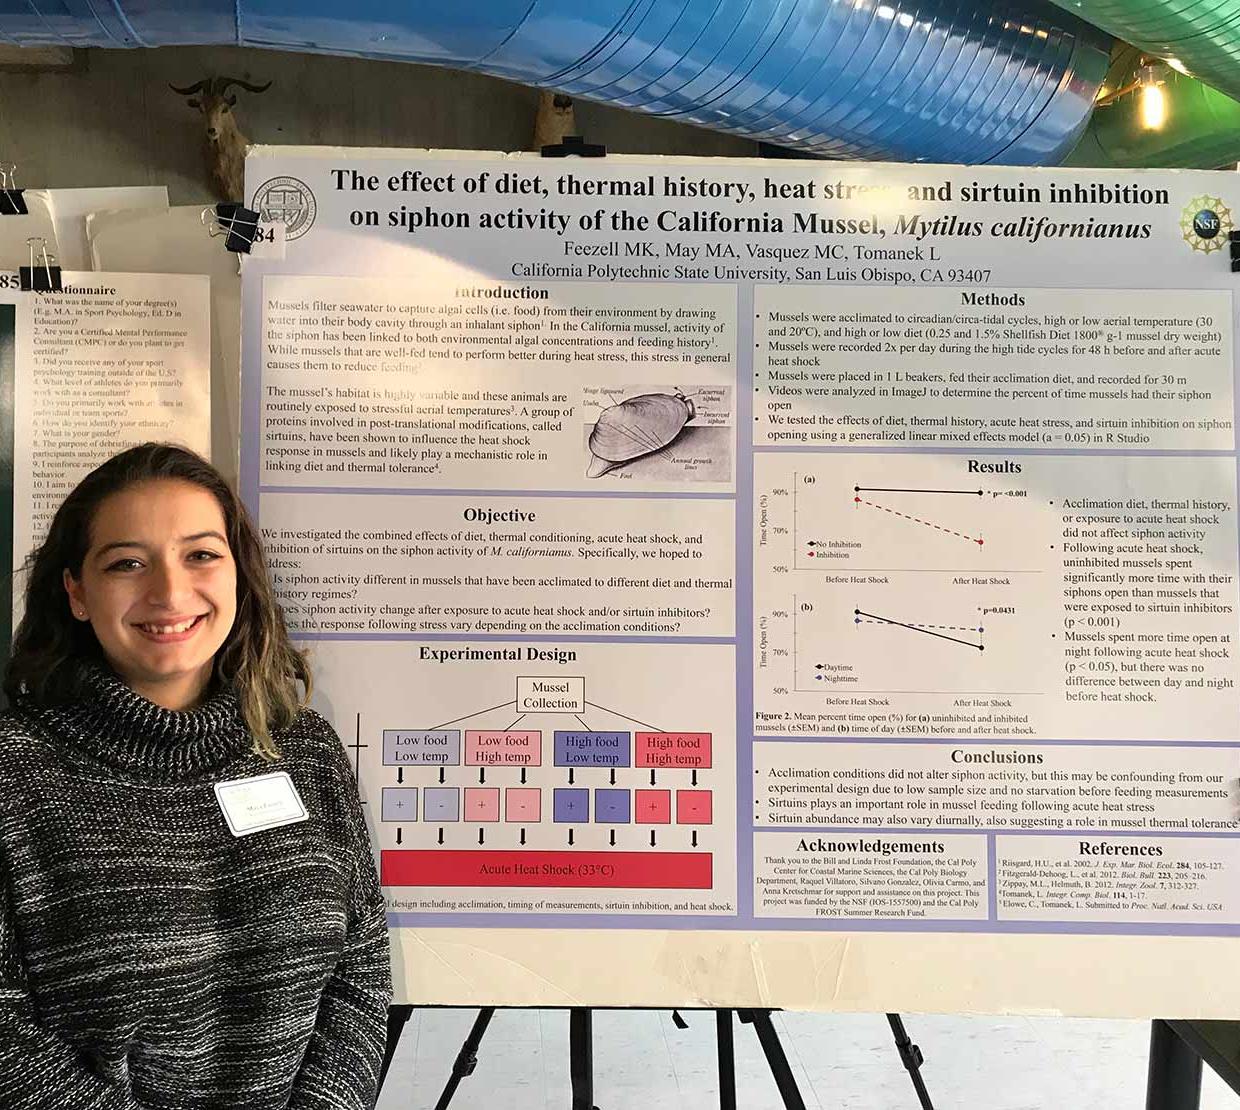 Maya Feezell standing next to her research poster